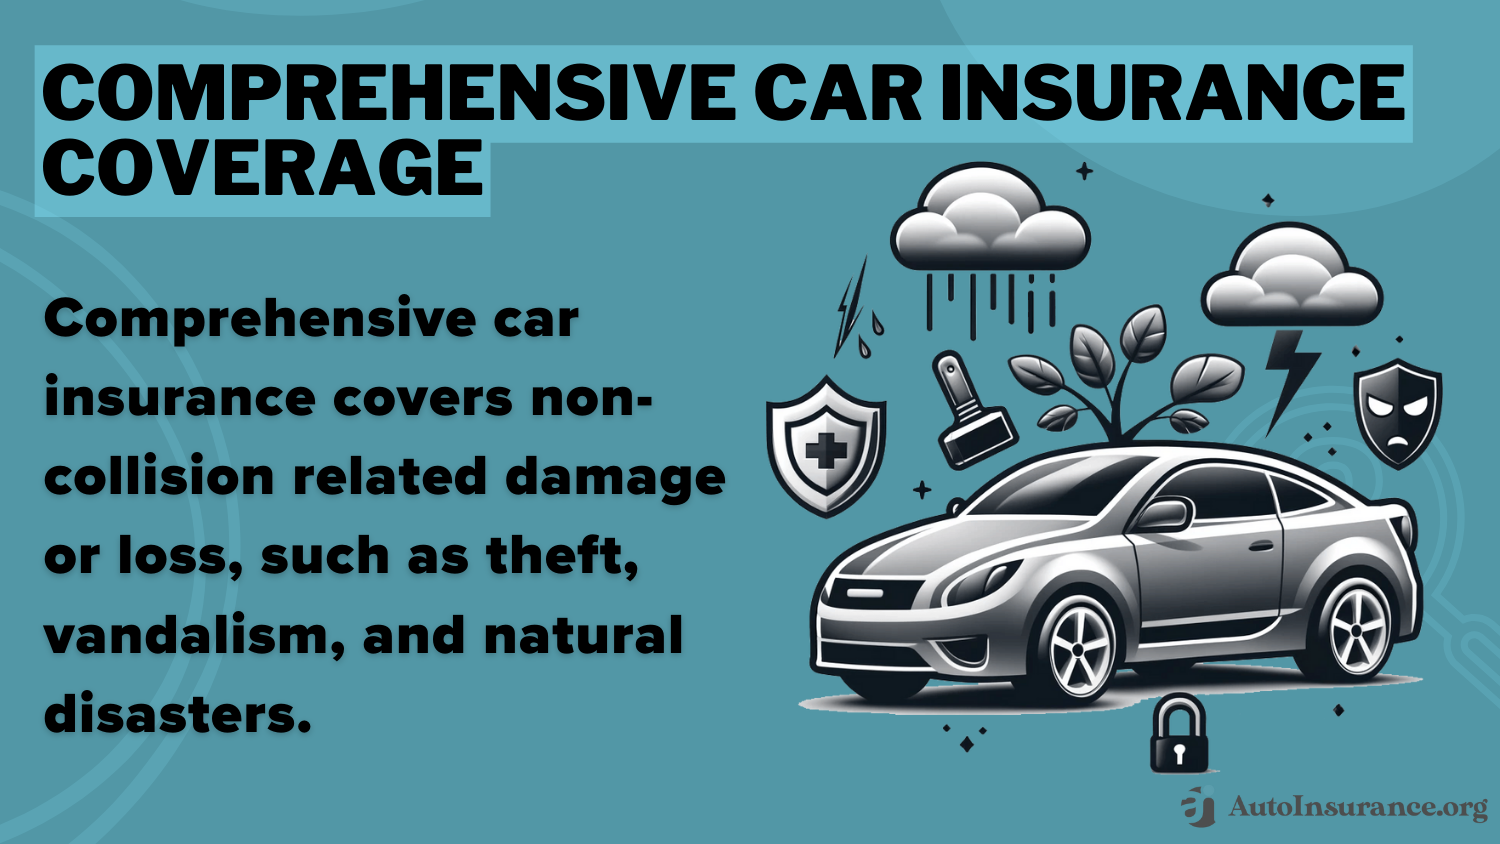 Does my auto insurance cover rental cars?: Comprehensive Car Insurance Coverage Definition Card